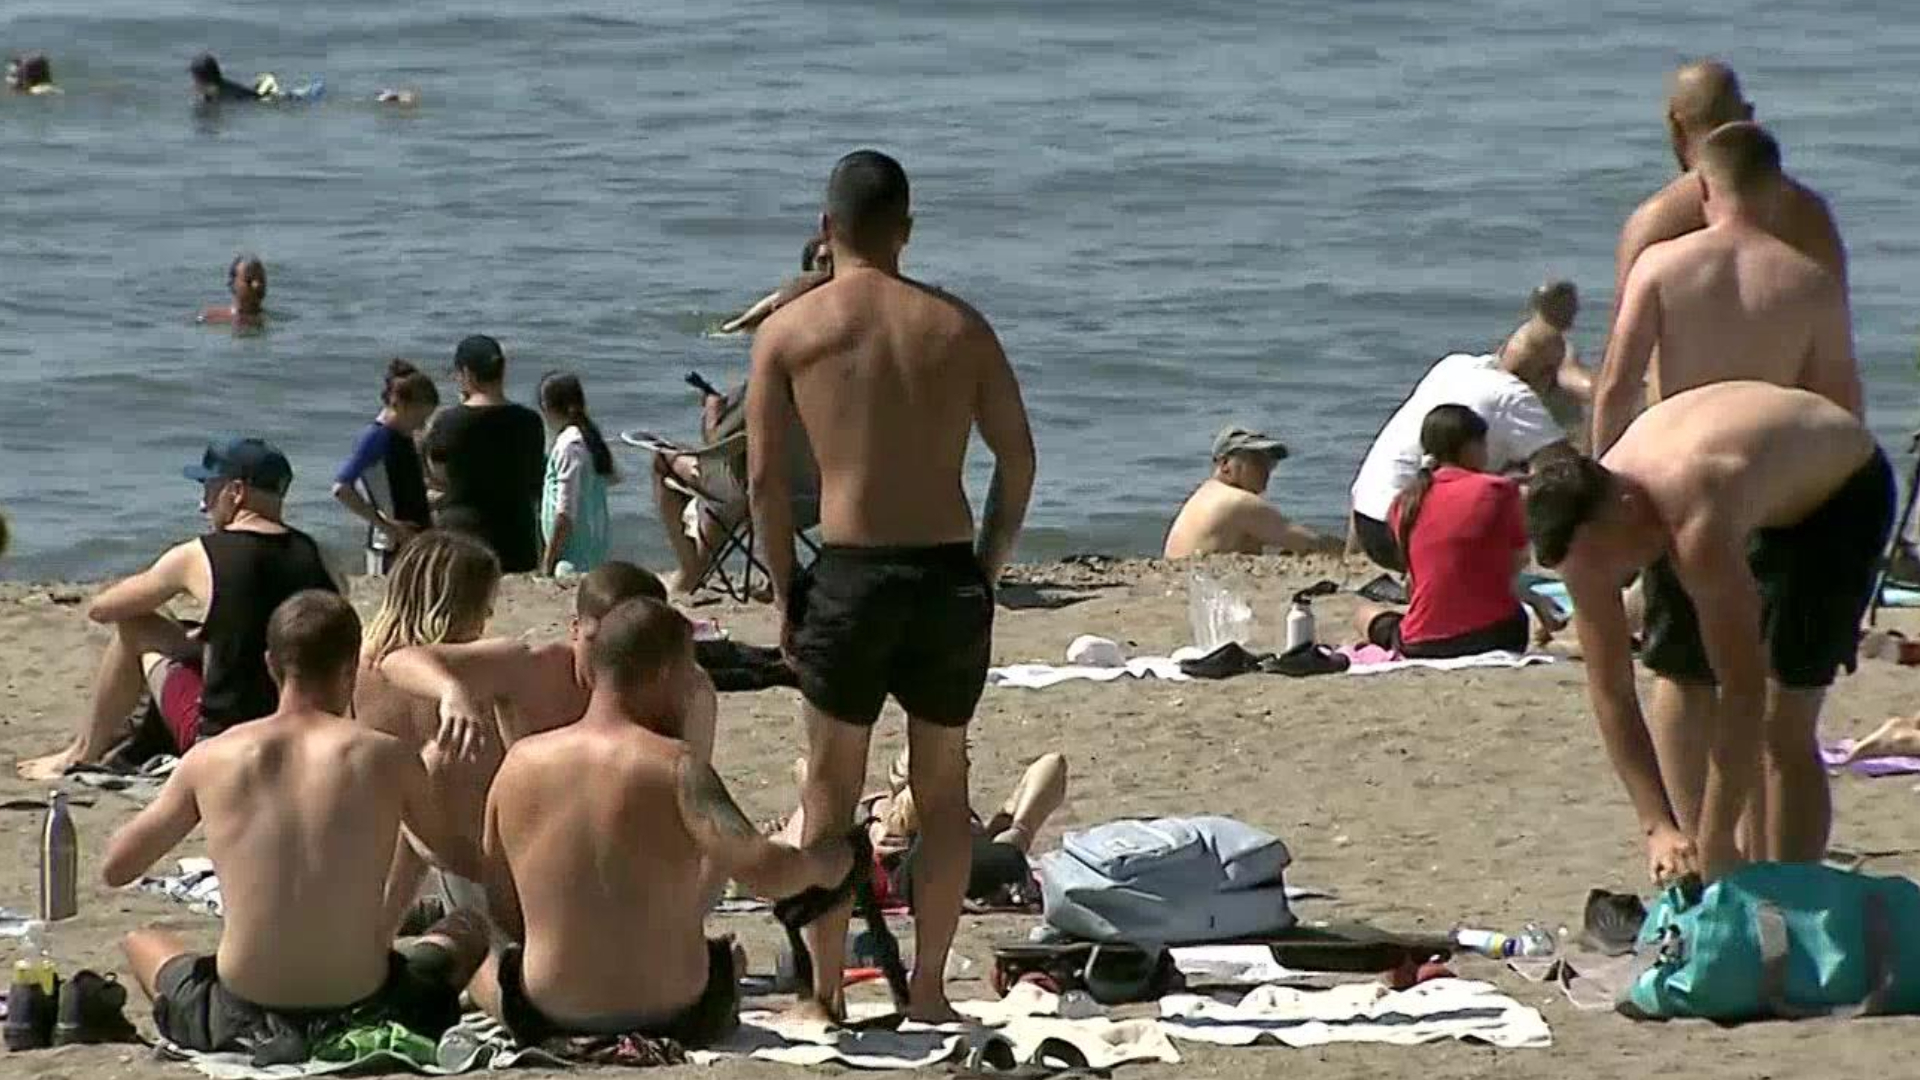 Province planning ahead of expected hot summer in B.C.